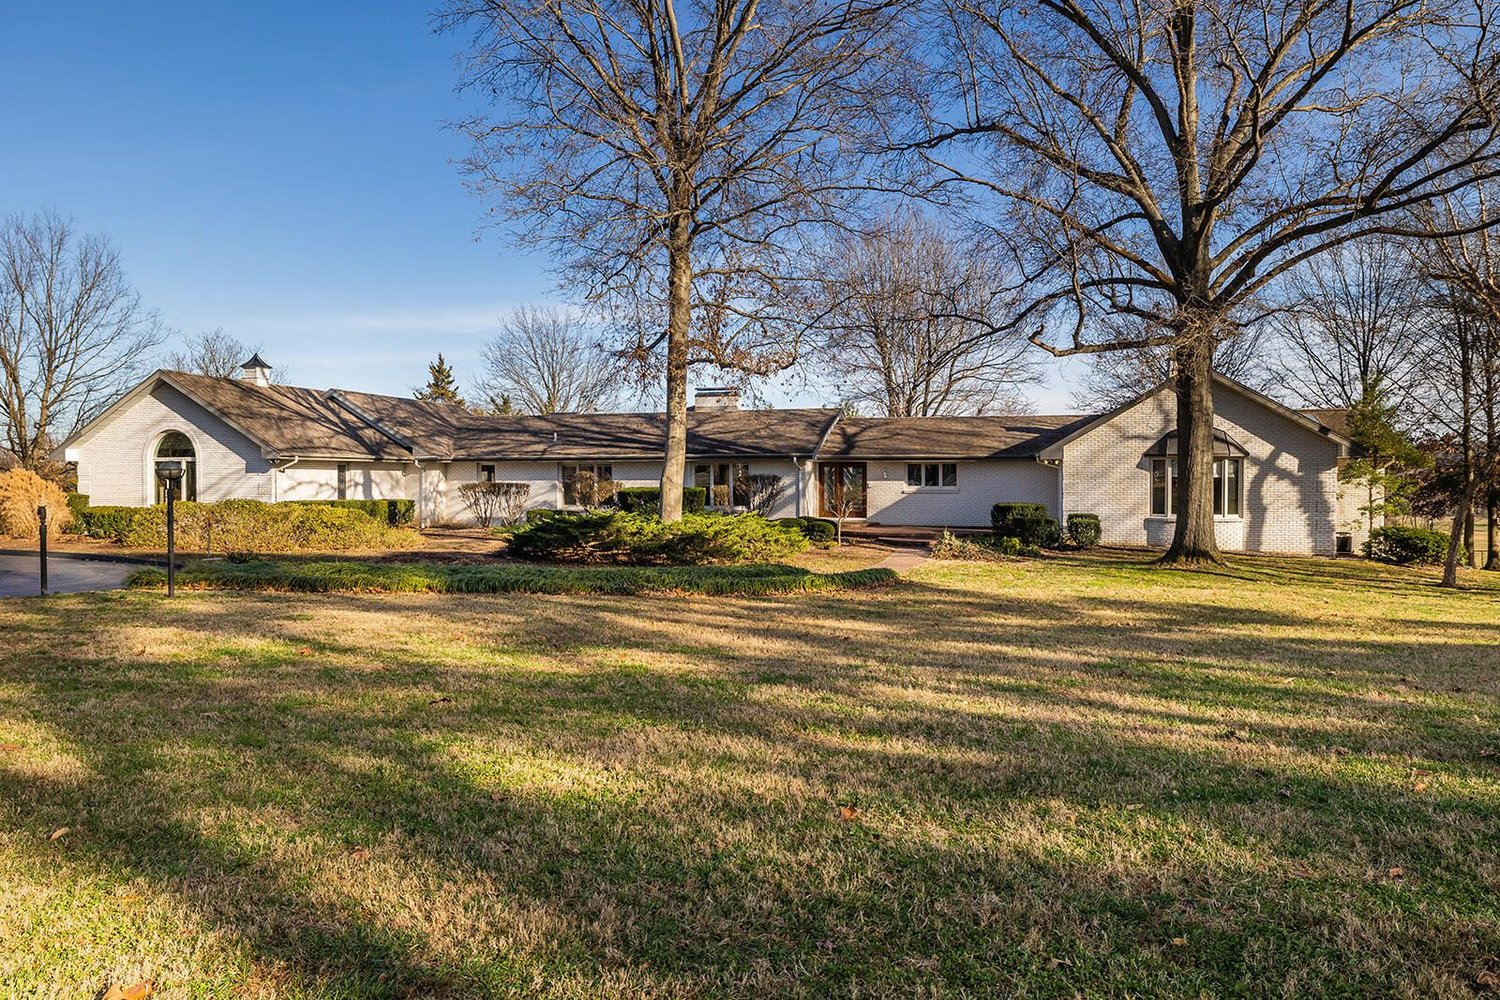 3332 S. Farm Road 187
$1.3 million
Bedrooms: 4
Bathrooms: 4
Listing firm: Cantrell Real Estate